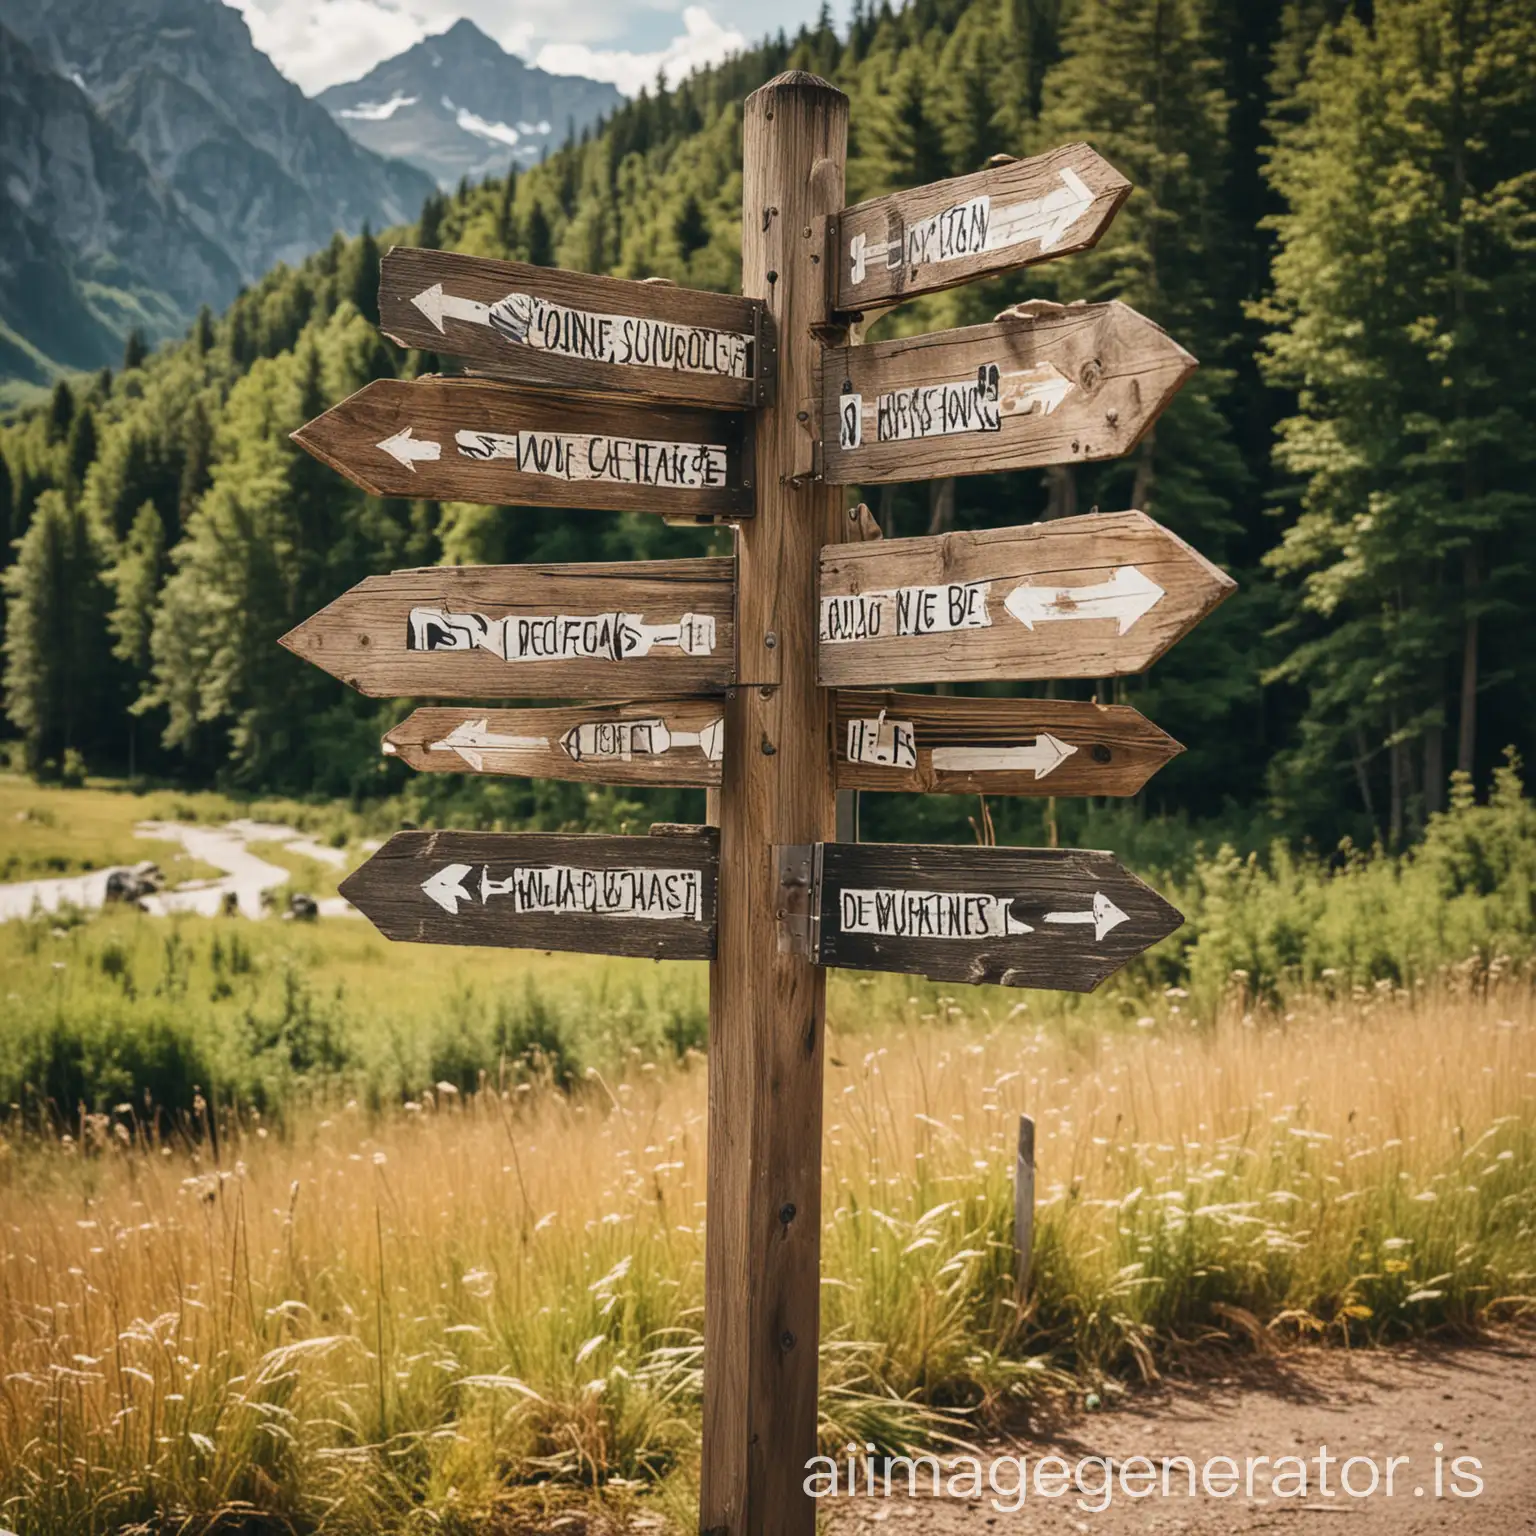 A signpost with multiple arrows pointing in different directions in a scenic outdoor setting.